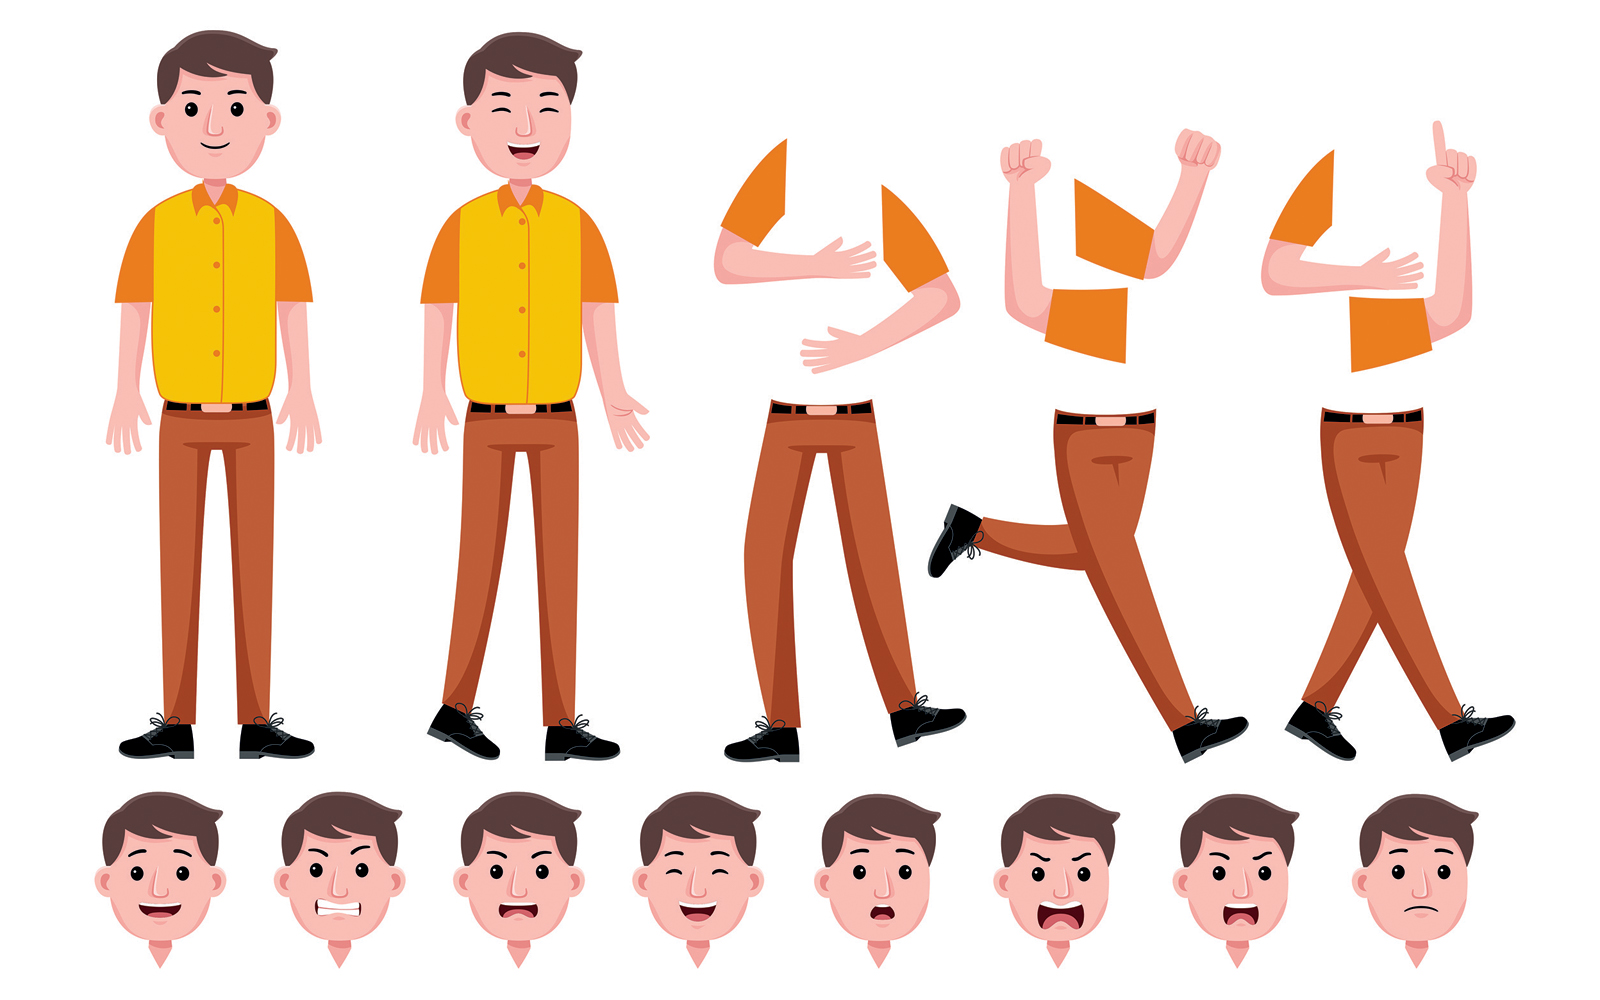 Stylized Characters Set for Animation #03 Vectors